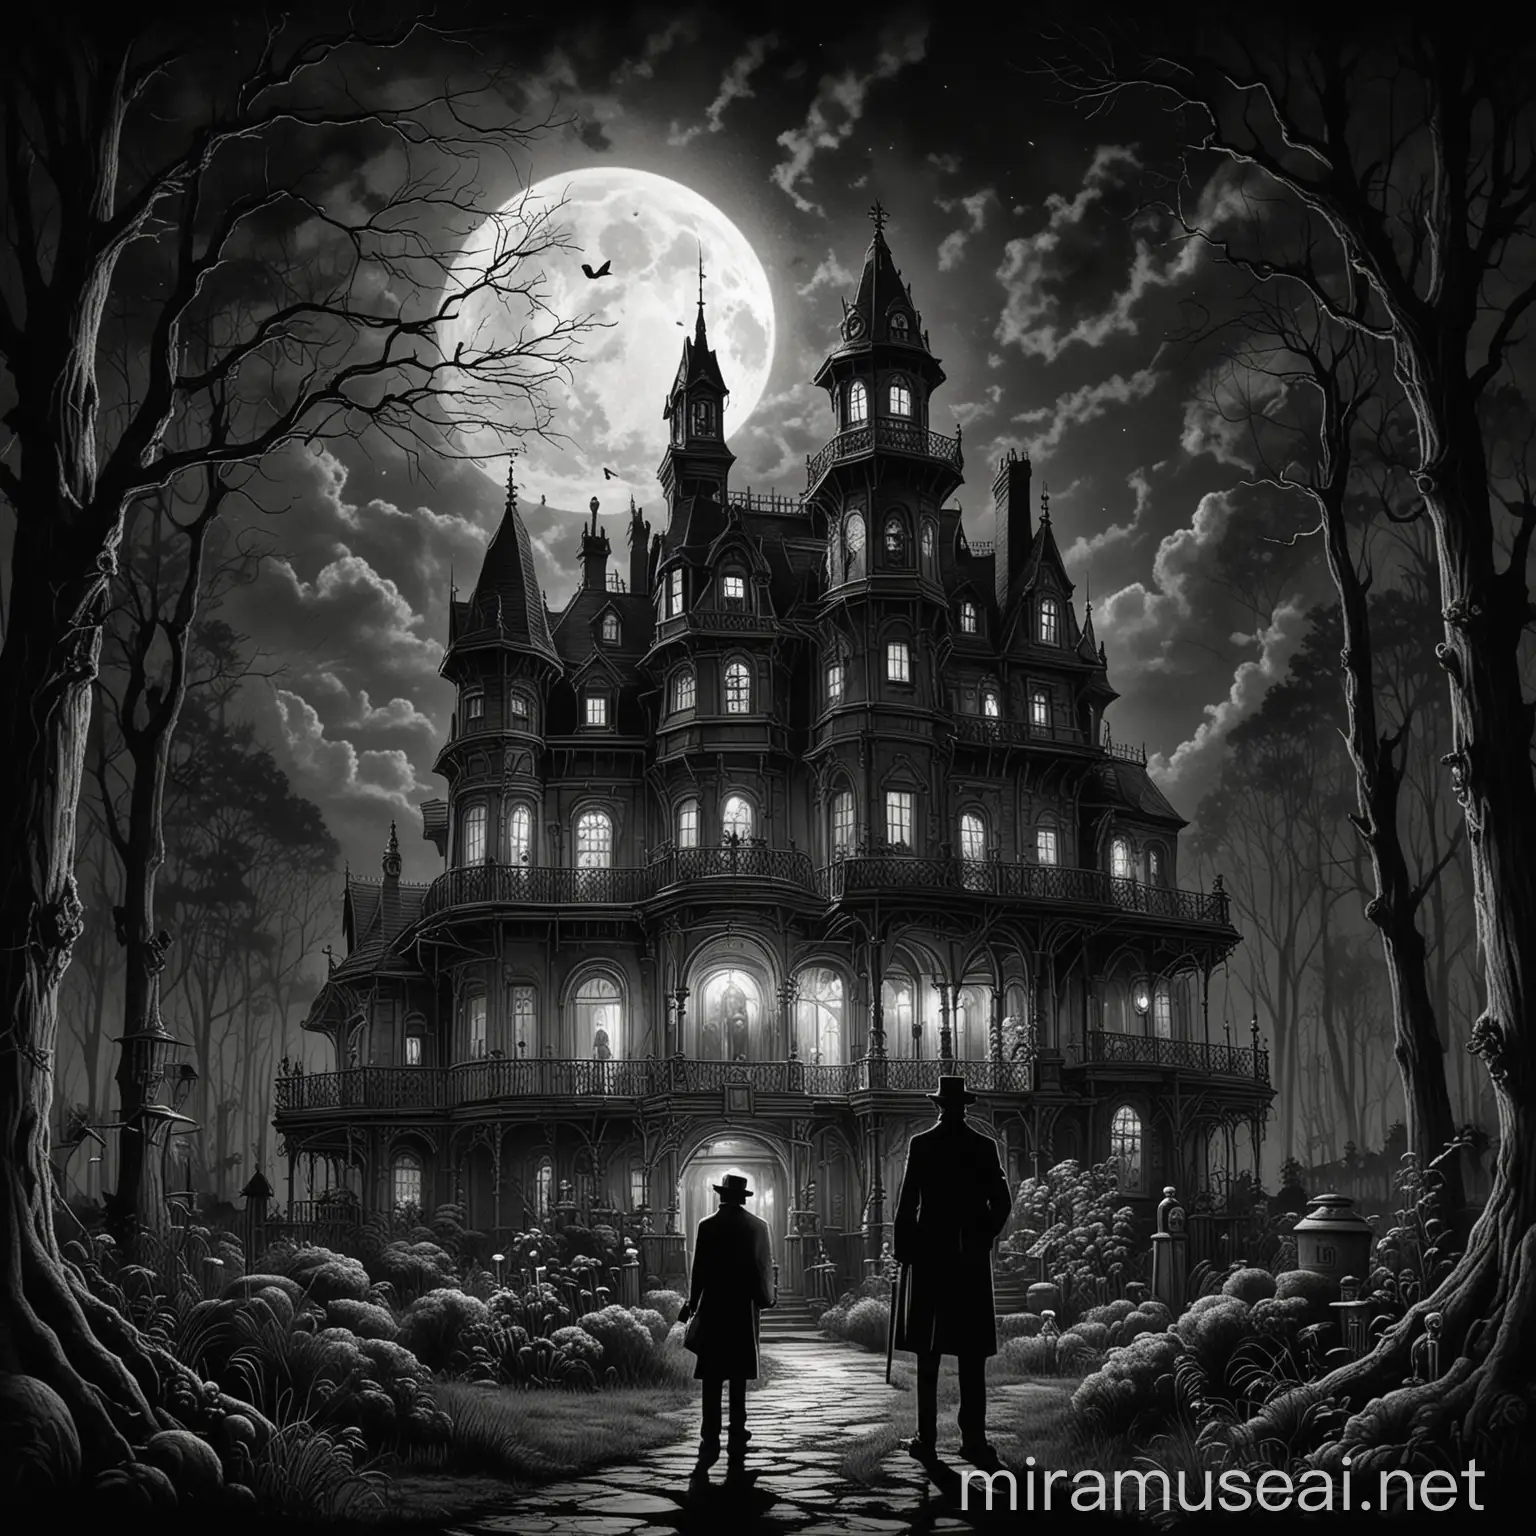 Tim Burtonstyle 1920s Noir Detective and Victorian Mansion in Shadowy Forest